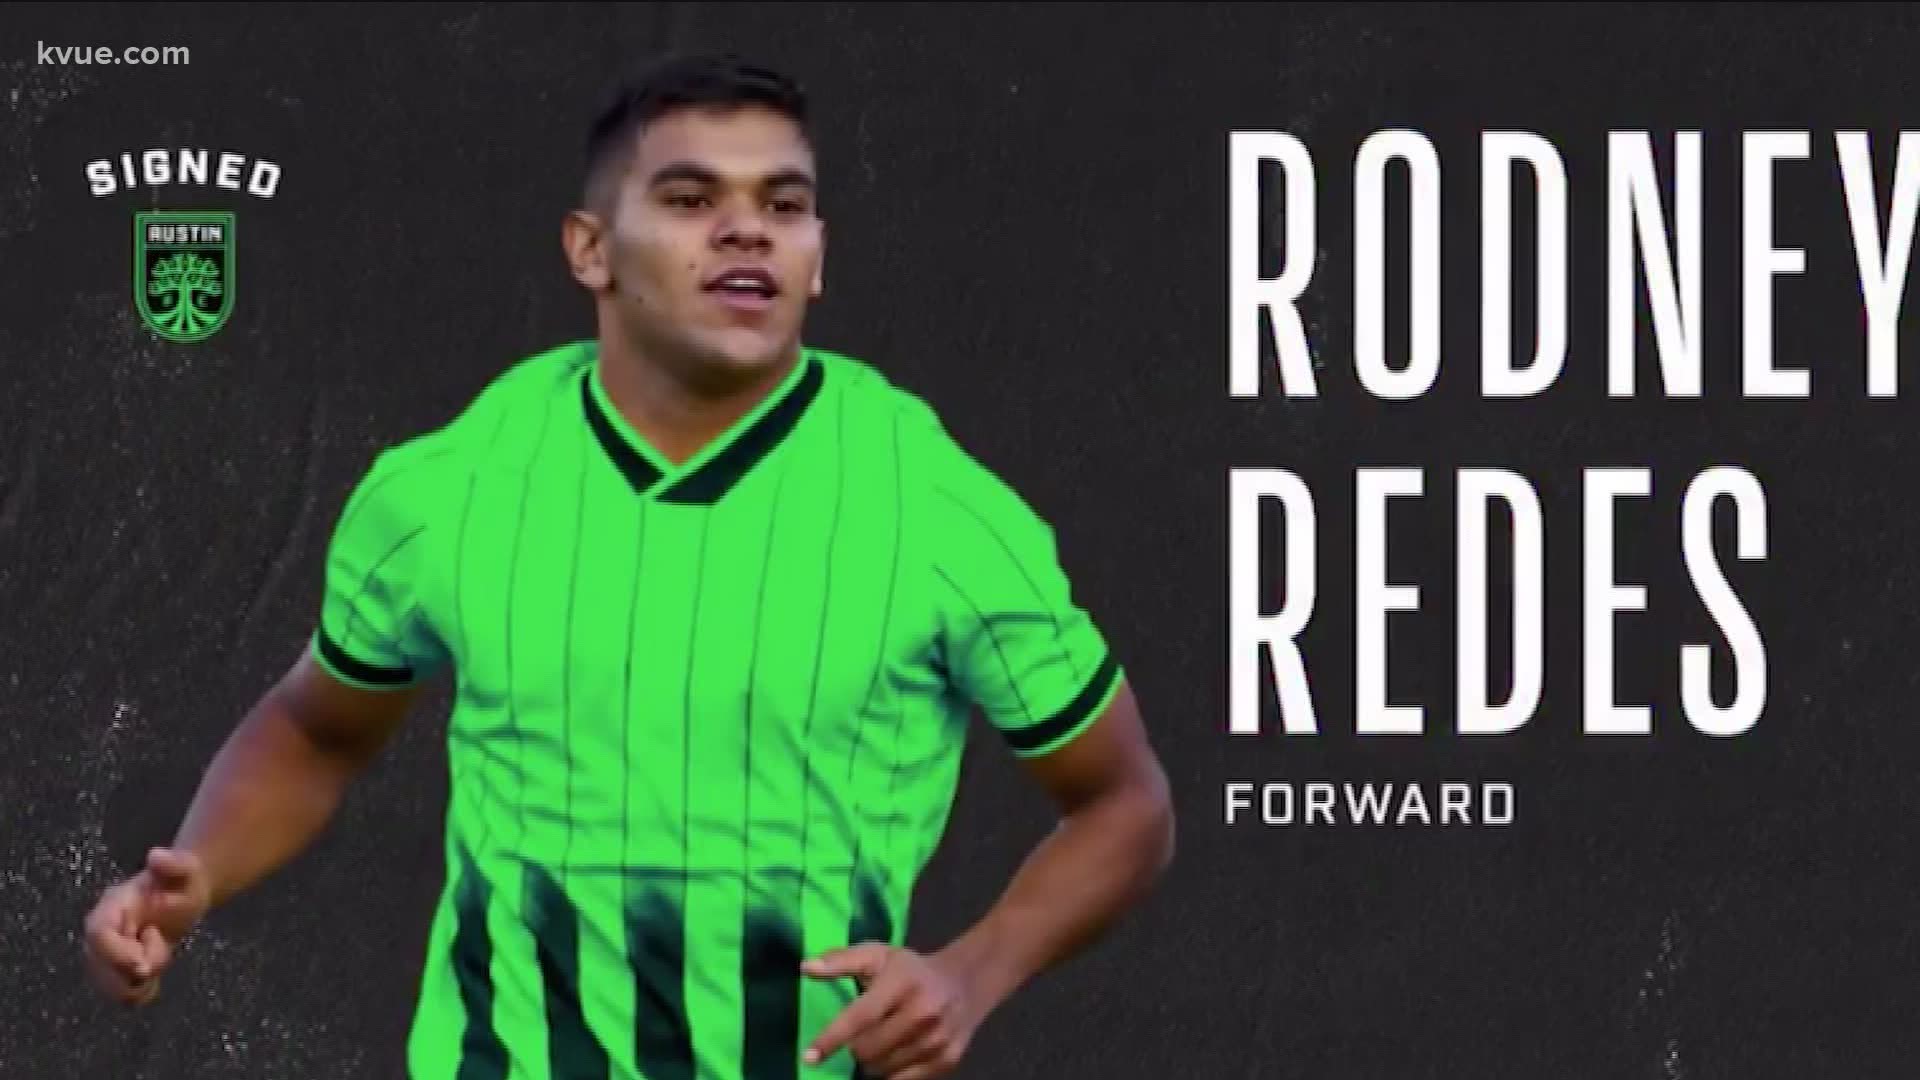 Austin FC announced its first signee on Monday, 20-year-old Rodney Redes of Paraguay.